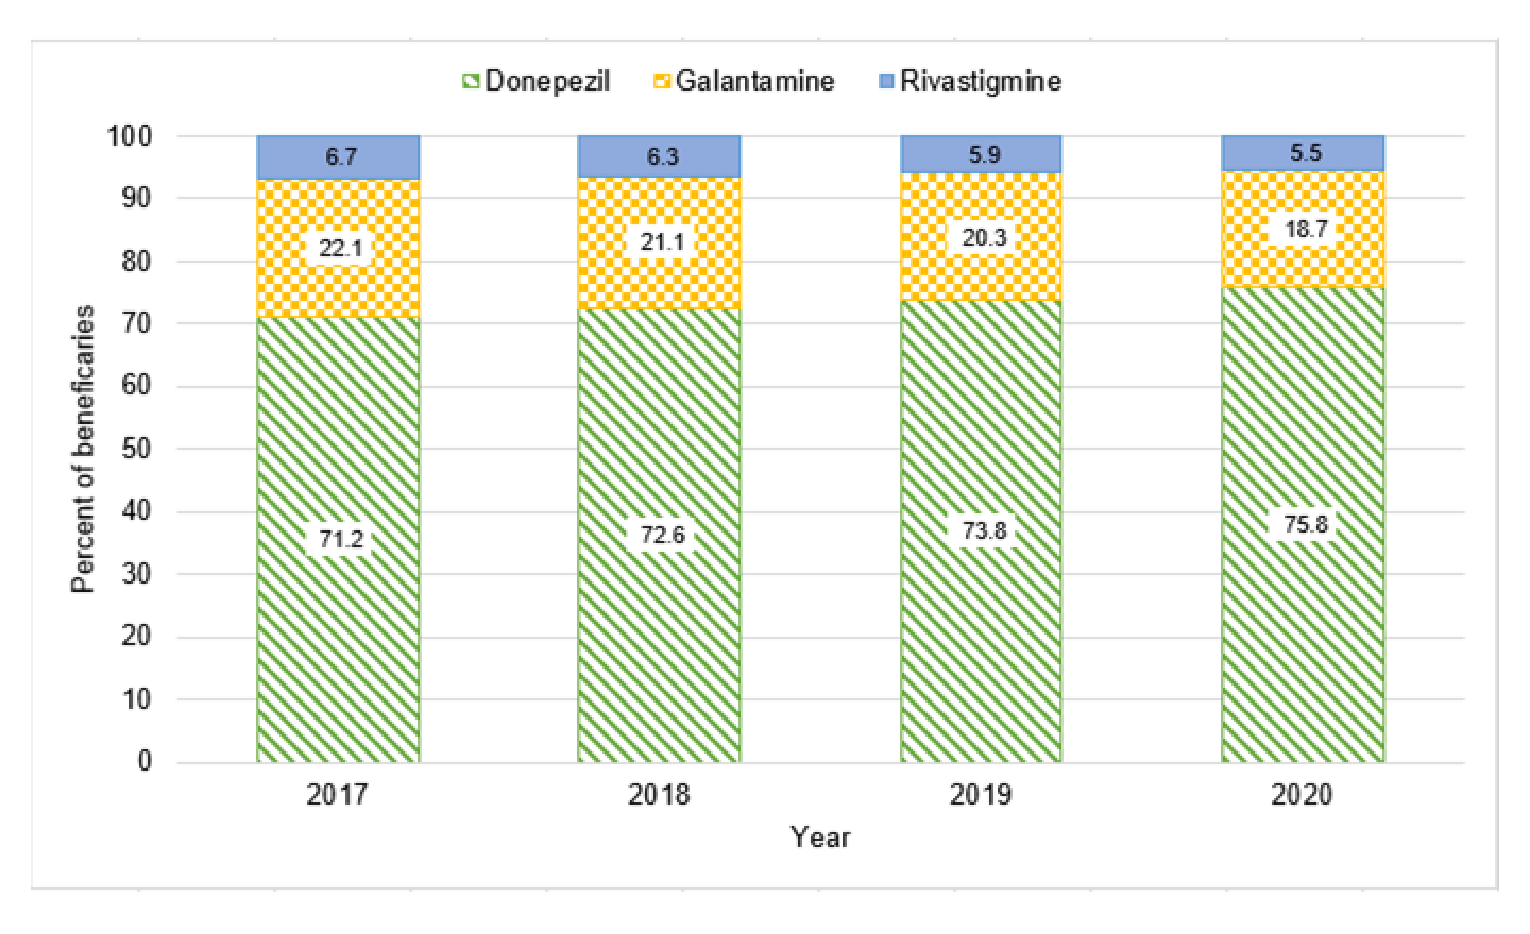 Bar graph showing the proportion of beneficiaries by drugs from 2017 to 2020 for Canada. Approximately 70 % to 75% of beneficiaries received donepezil over the time period compared with 20% of beneficiaries for galantamine and 6% of beneficiaries for rivastigmine.